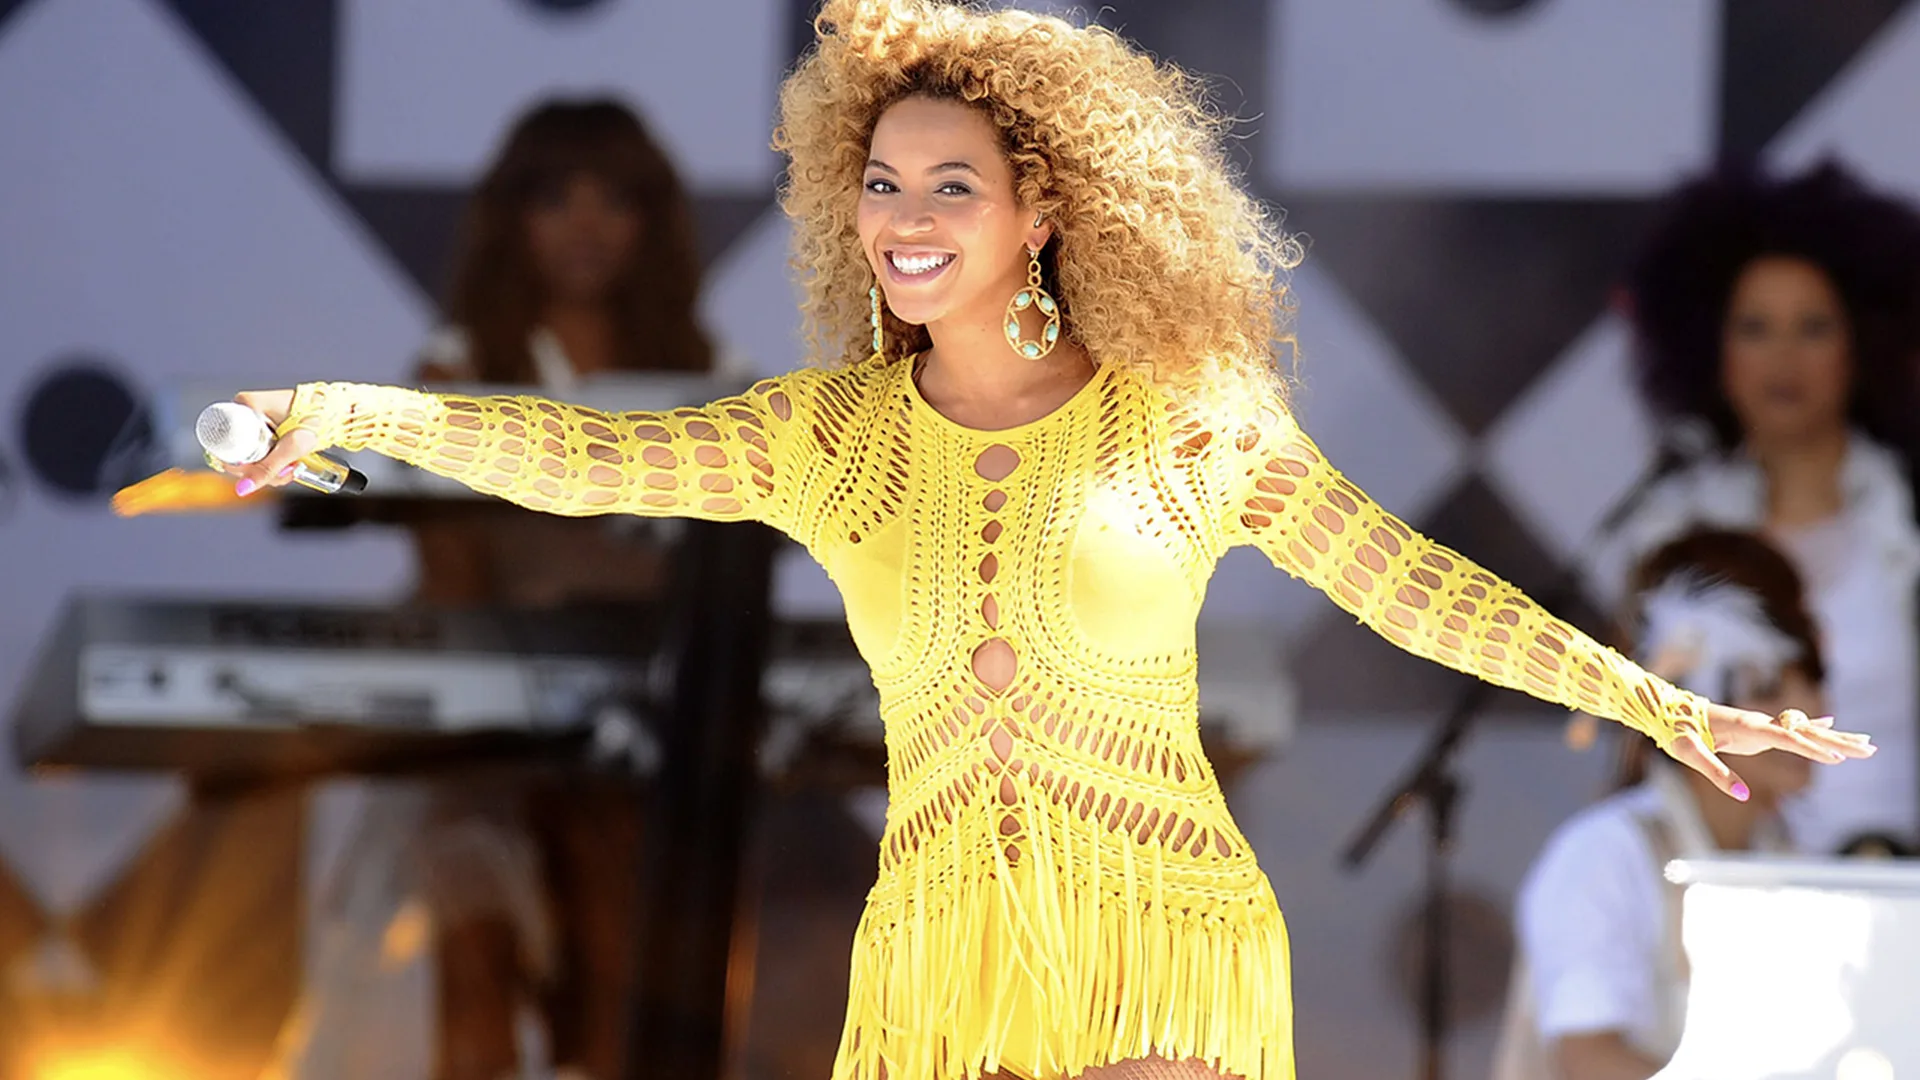 Beyoncé wearing a yellow dress on stage with her microphone in her hand